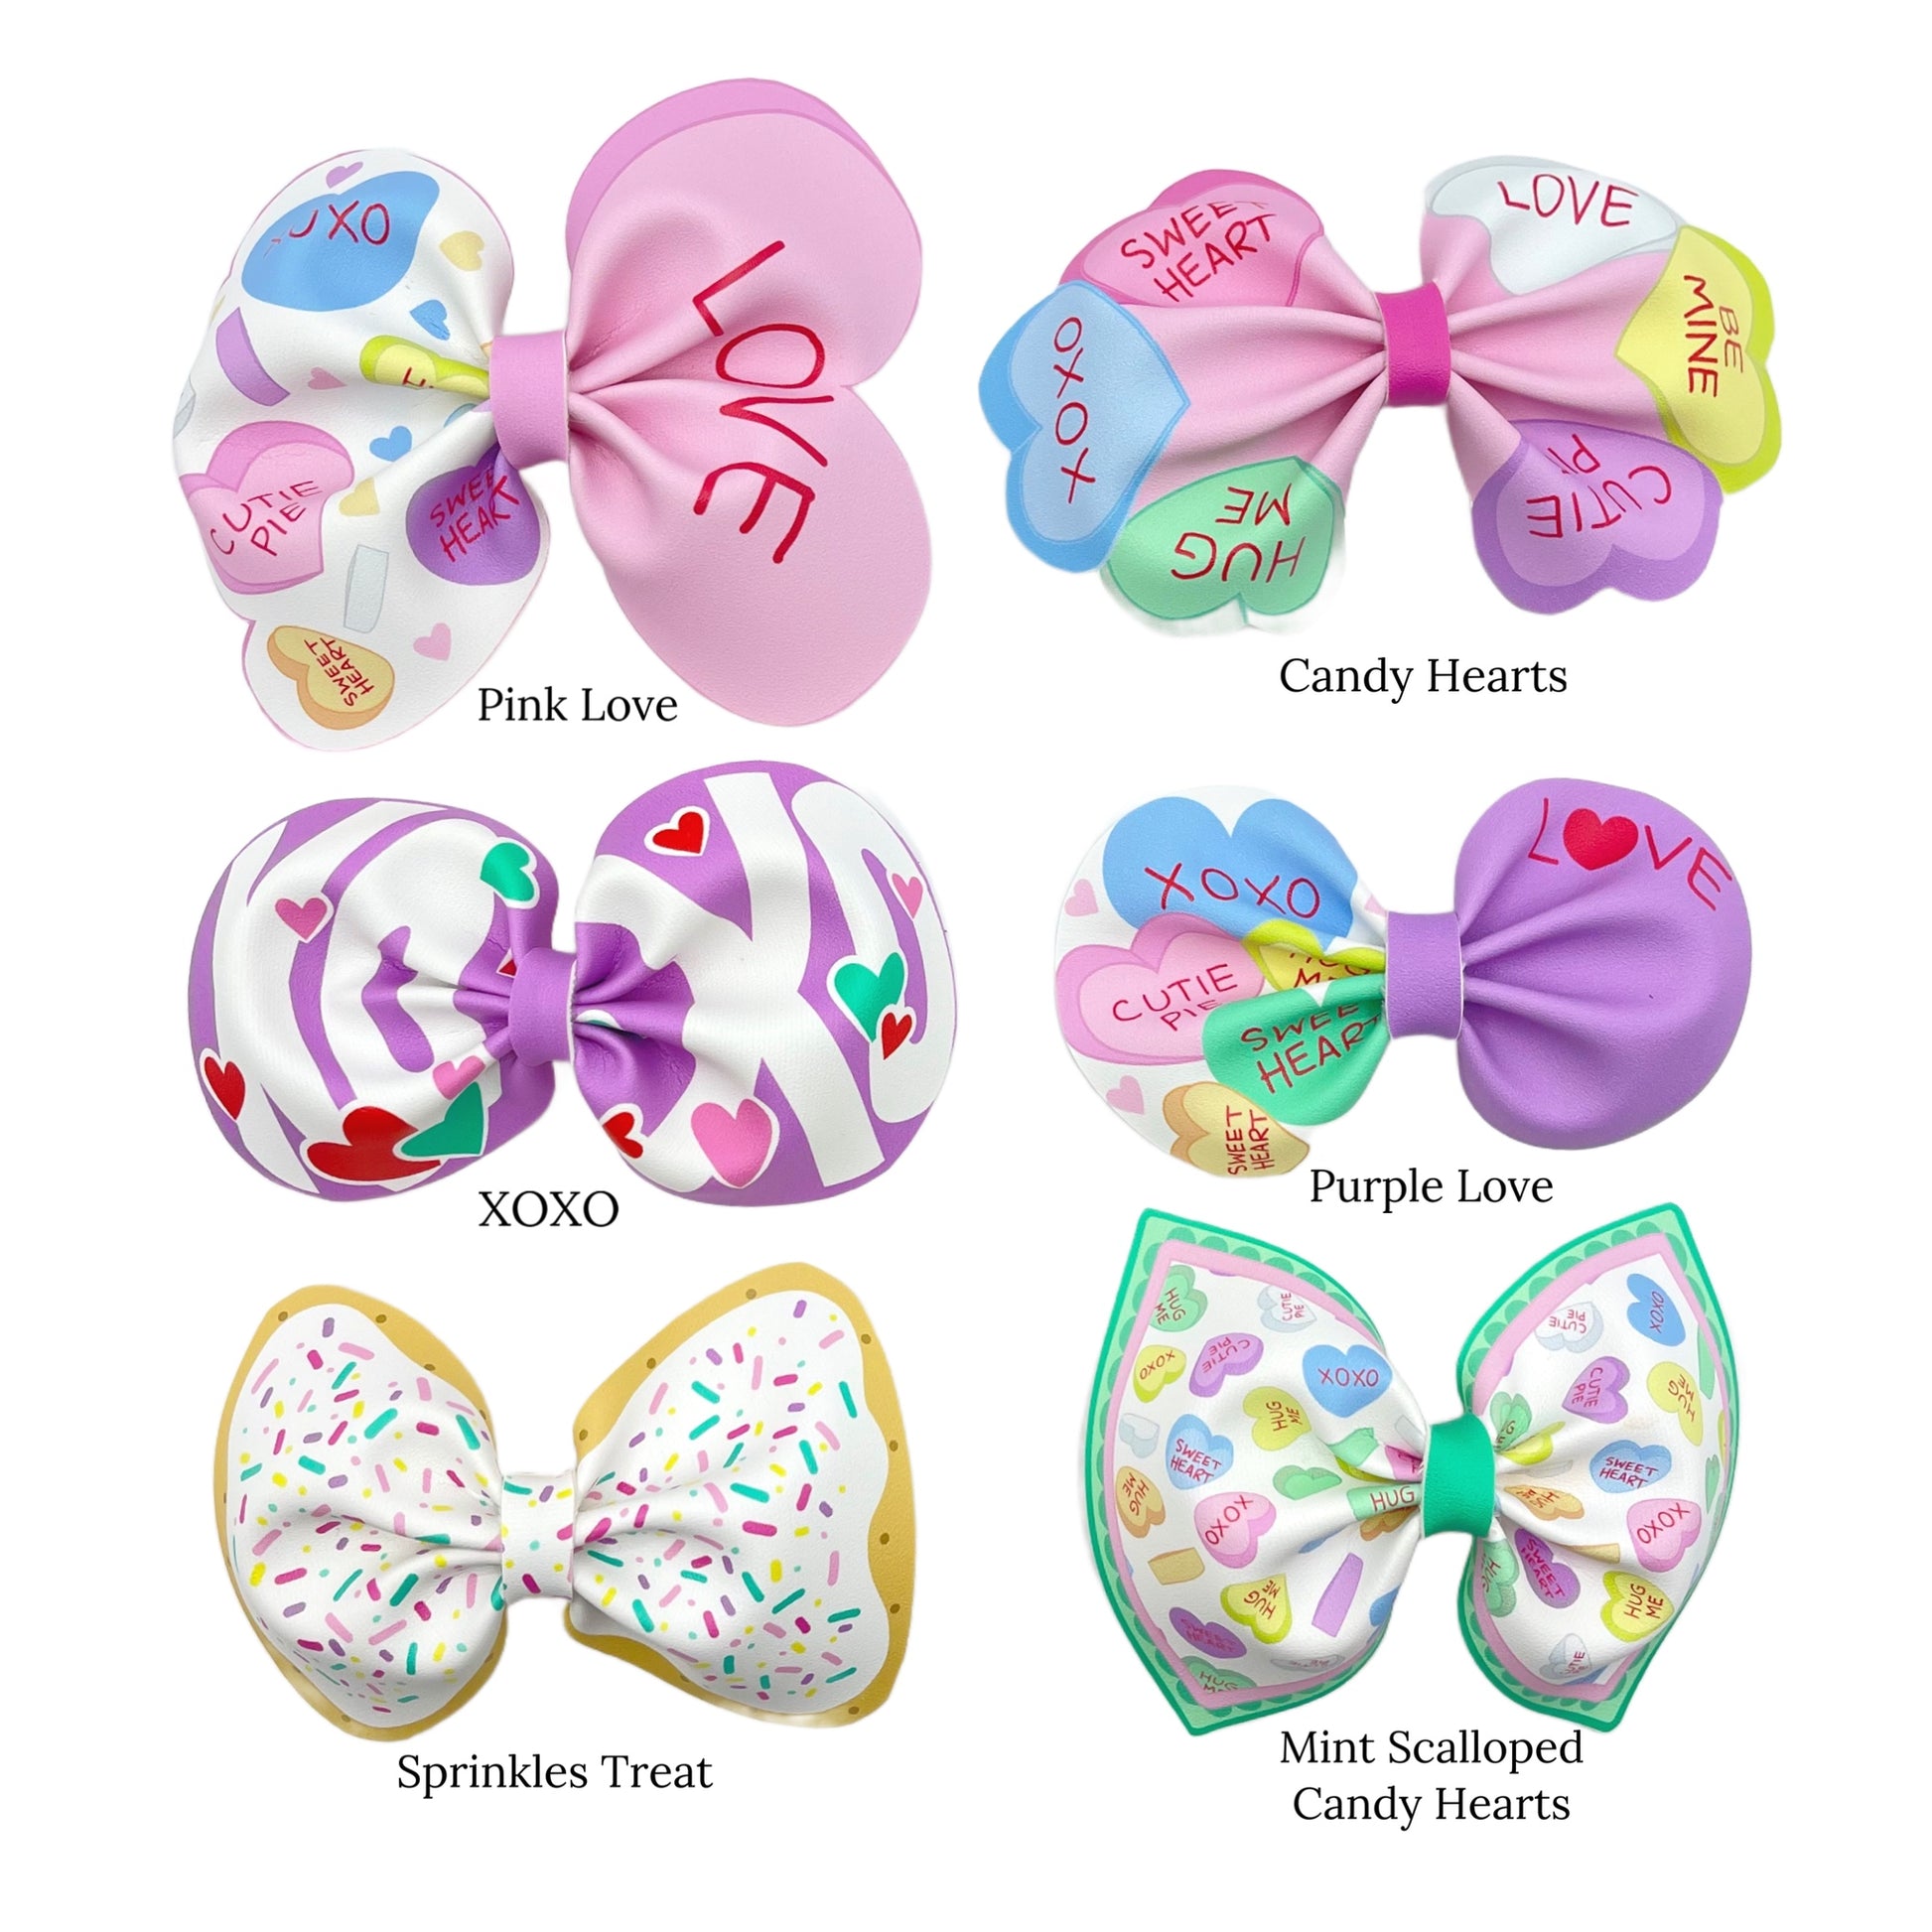 Pastel candy conversation hearts with sprinkled treats faux leather hair bows template names